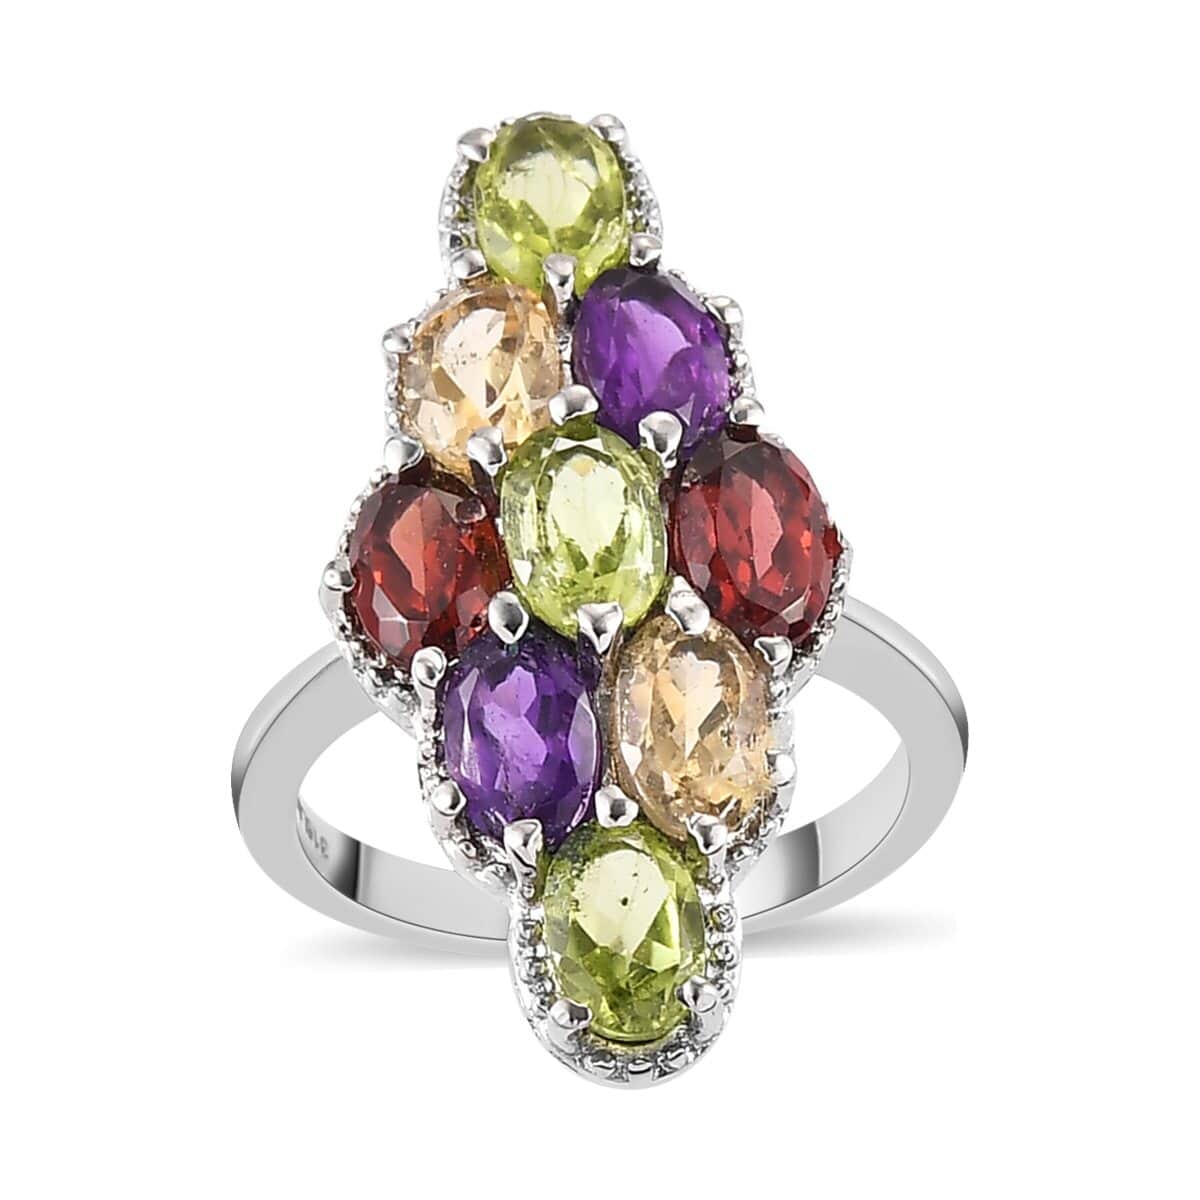 Shop LC Red Garnet Peridot Oval Stainless Steel Statement Ring for ...